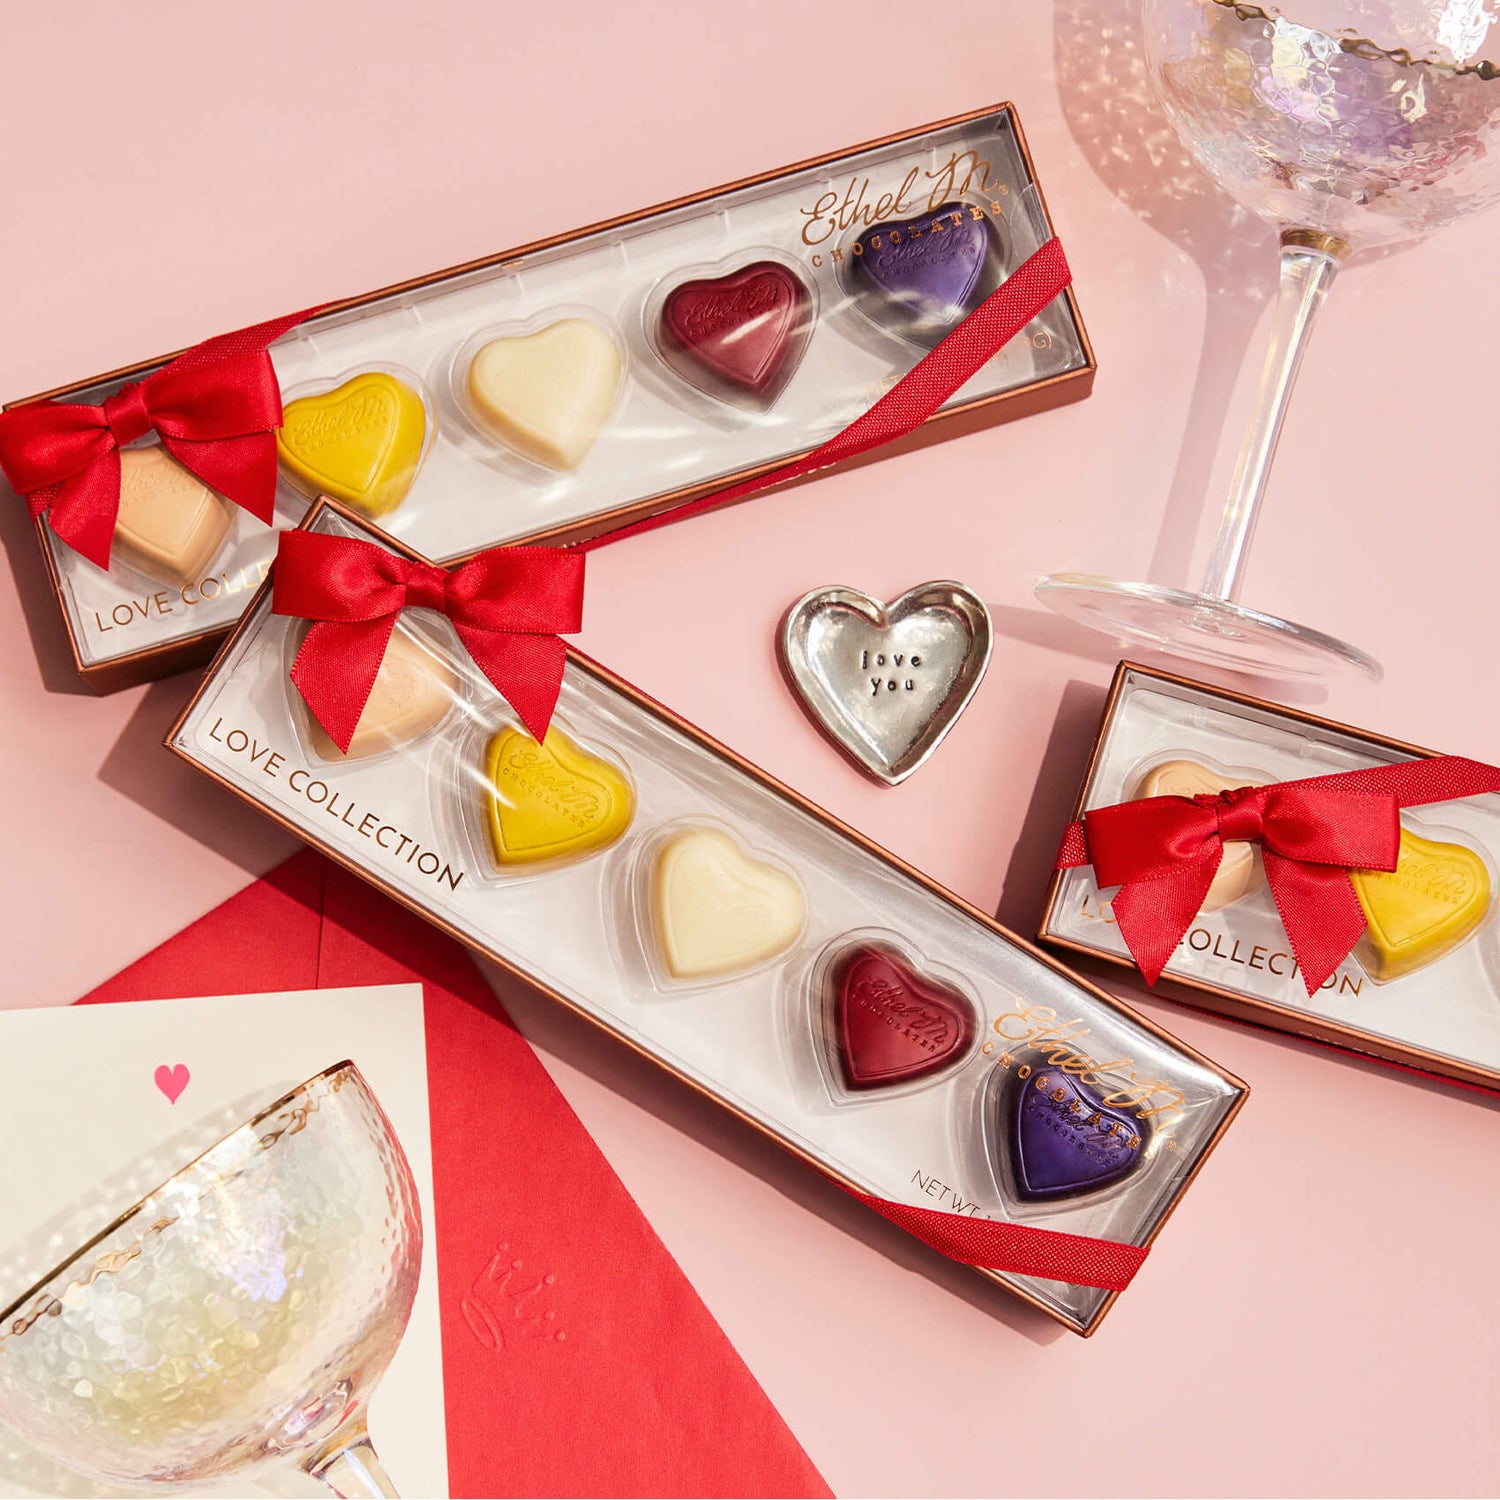 Ethel M Love Collection - 5pc Valentine's Day Chocolate Assortment Lifestyle Image